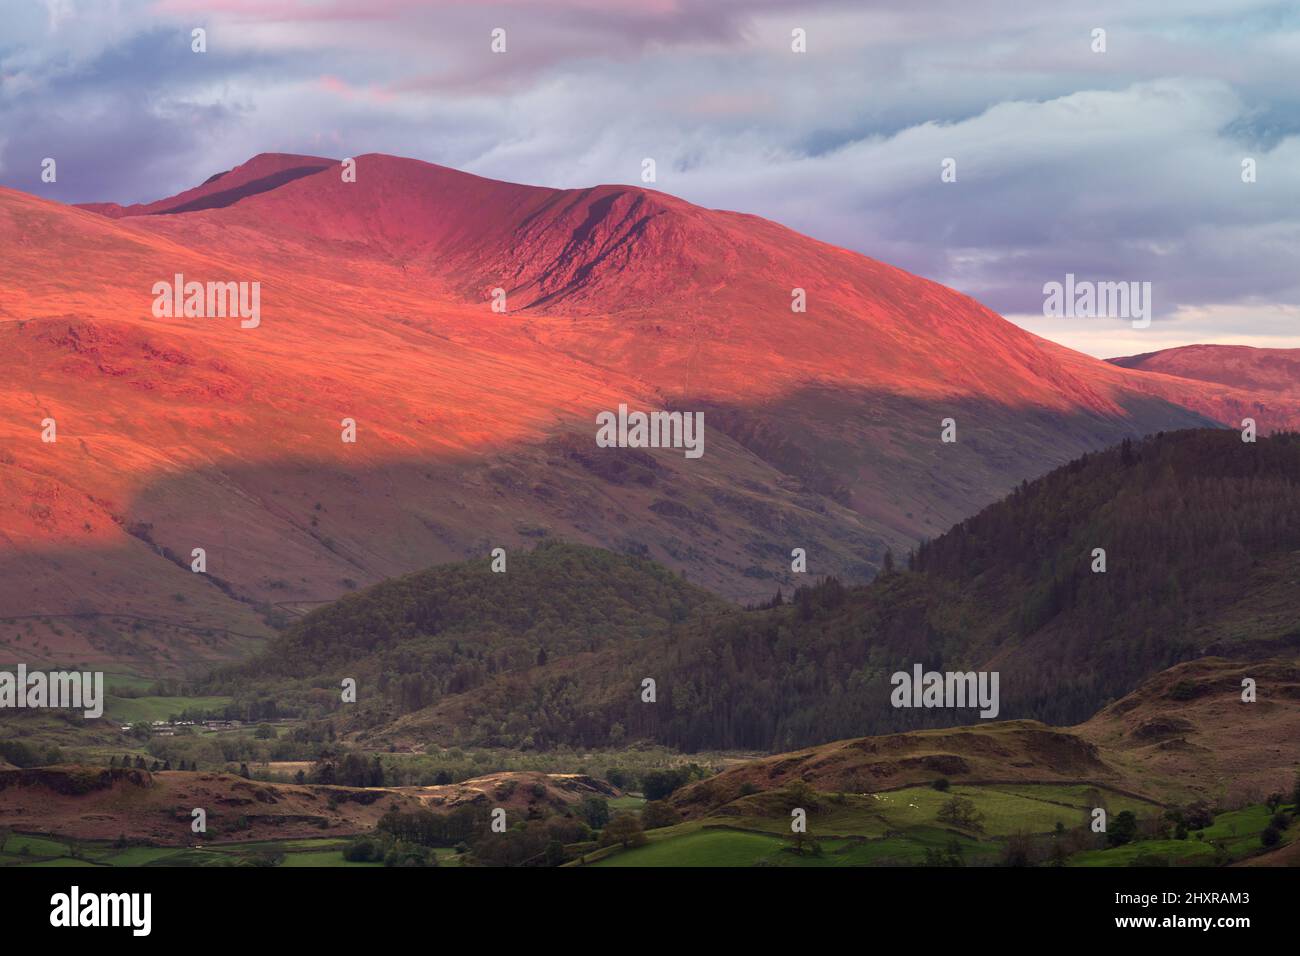 Evening light from the sunset casting a red glow and long shadows on Helvellyn mountain range in the English Lake District. Stock Photo